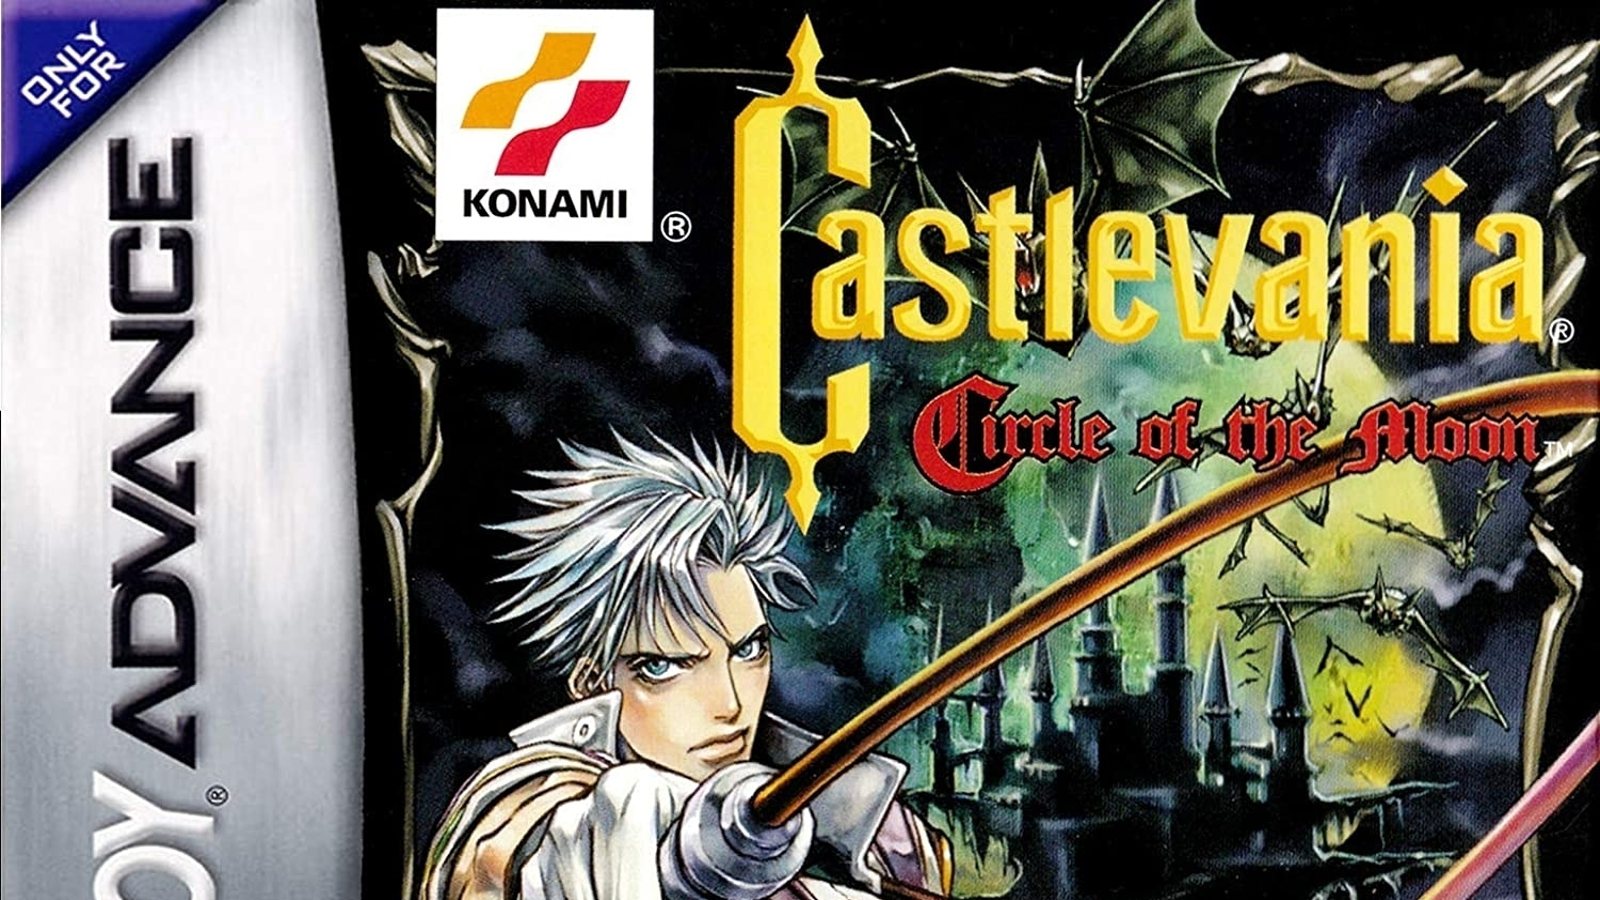 I was supposed to make another meme but made this instead : r/castlevania